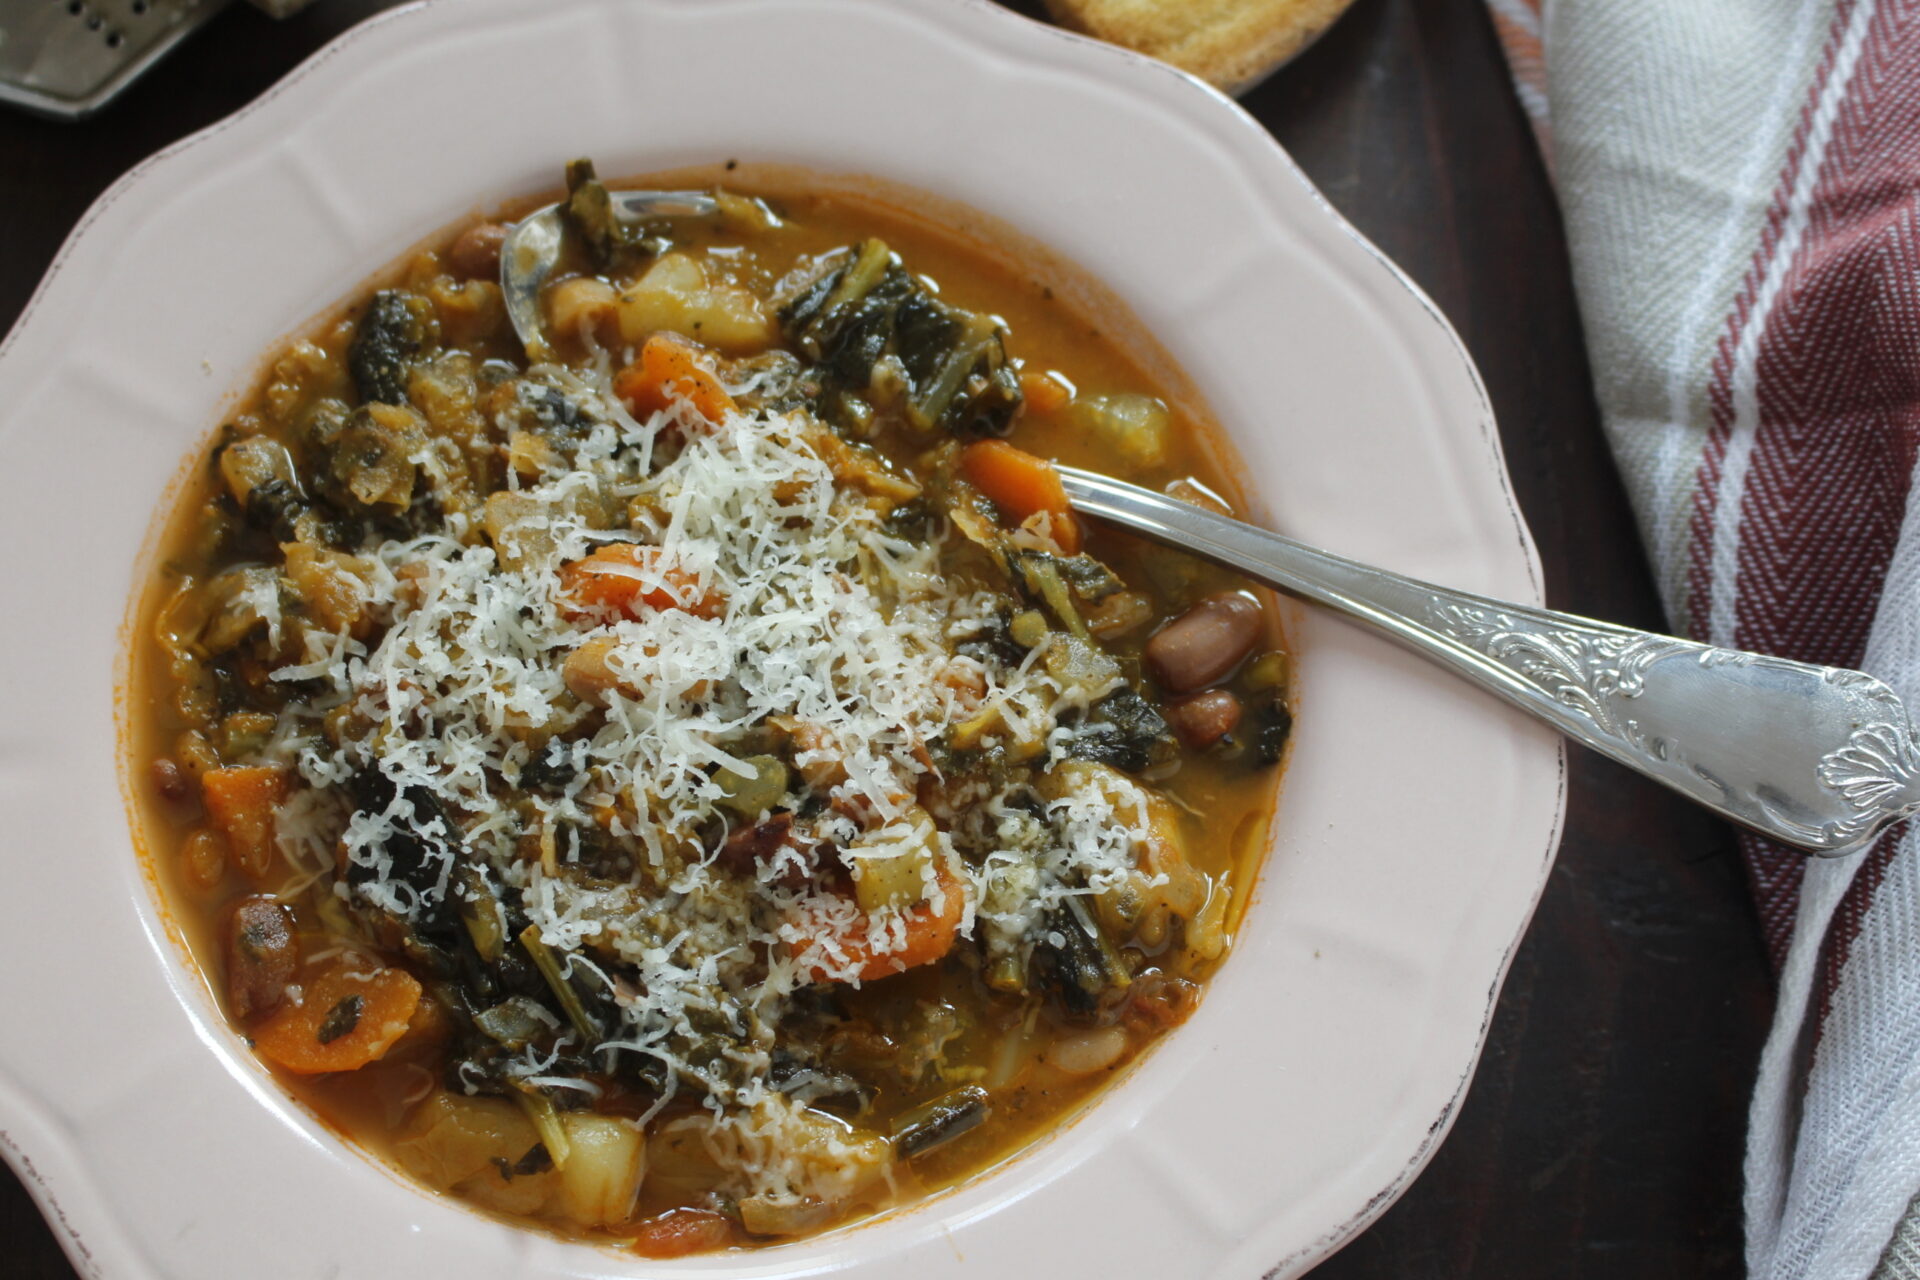 Ribollita a healthy Italian soup beloning to the Tuscan cuisine